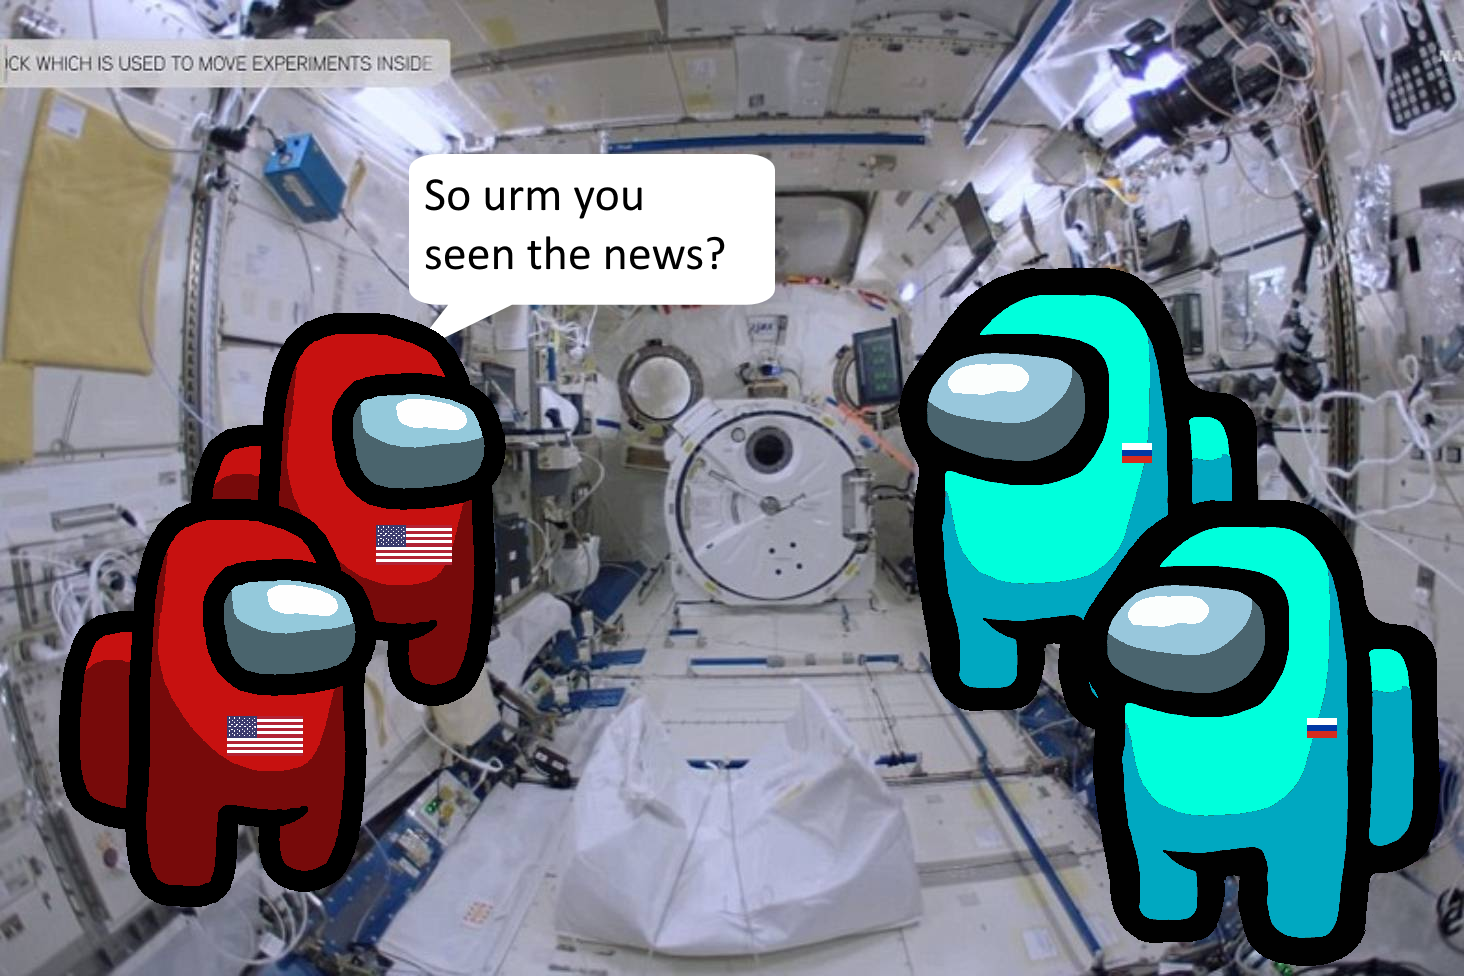 Getting awkward up in the international space station